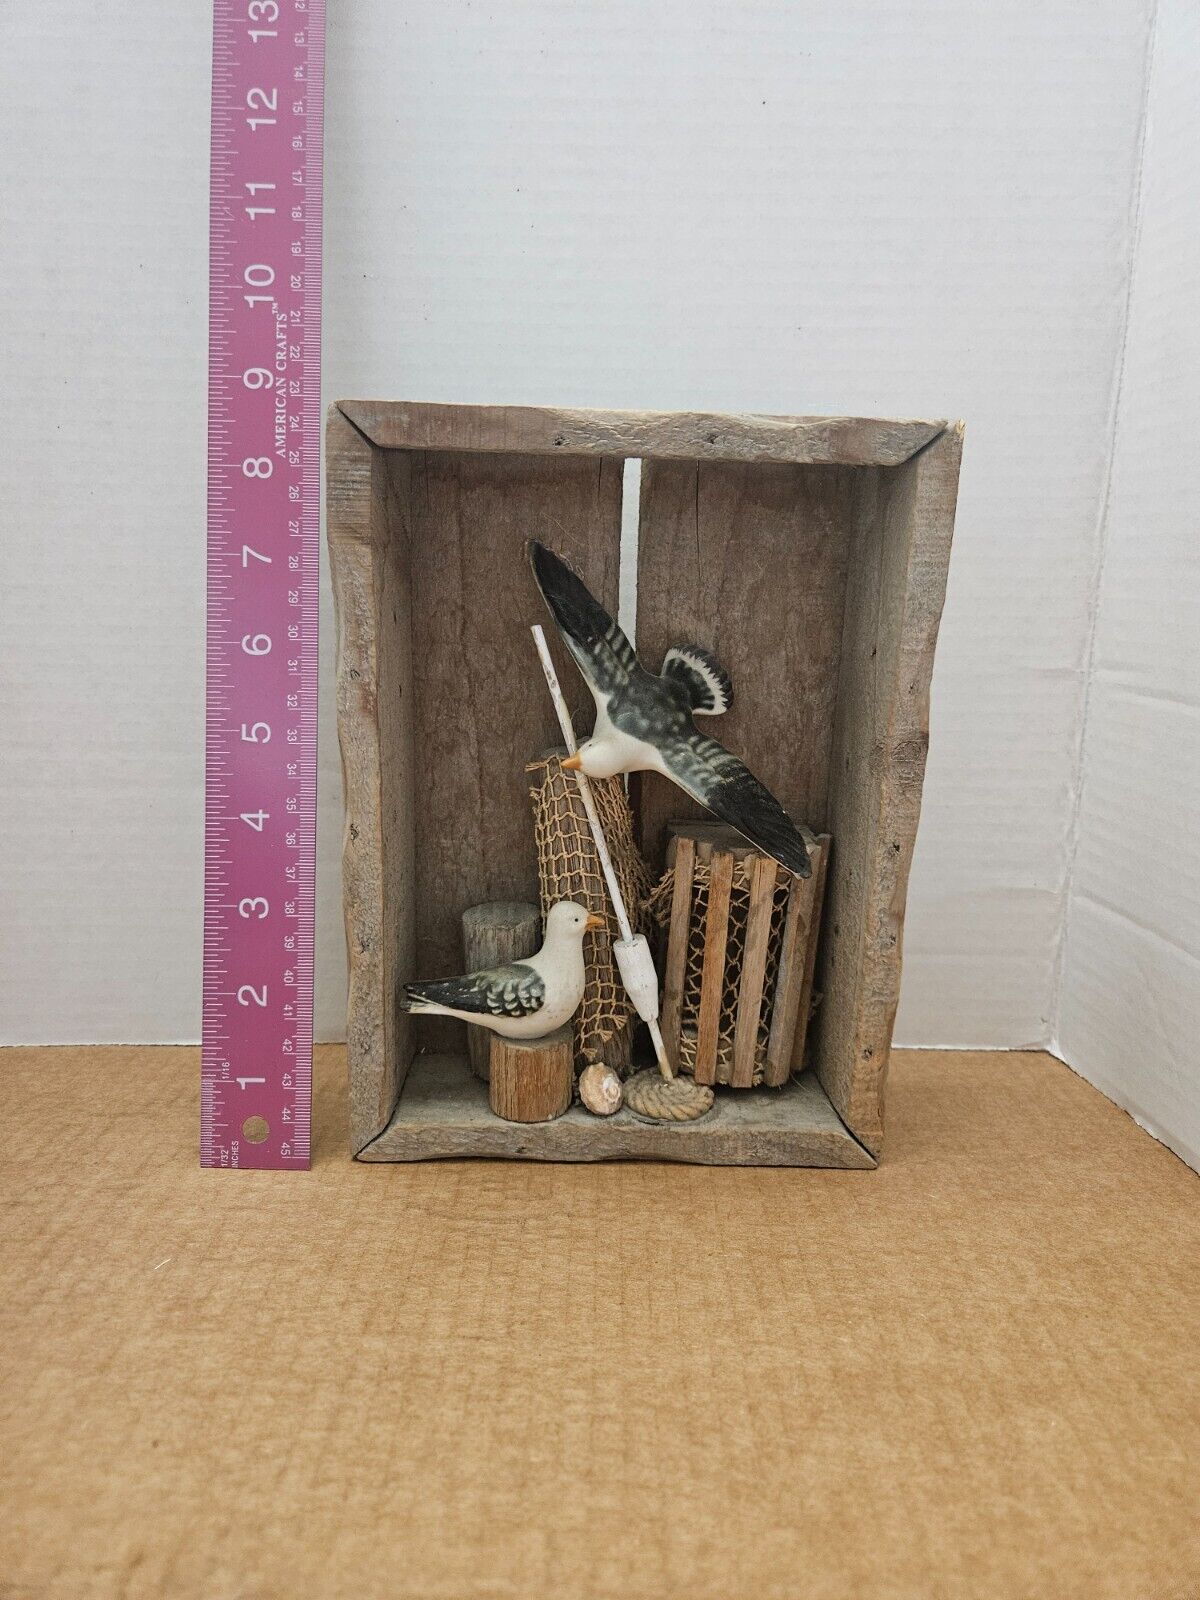 Vintage 8-1/2” x 6” Wooden Crate Décor with Porcelain Seagulls, Buoys, and Crab